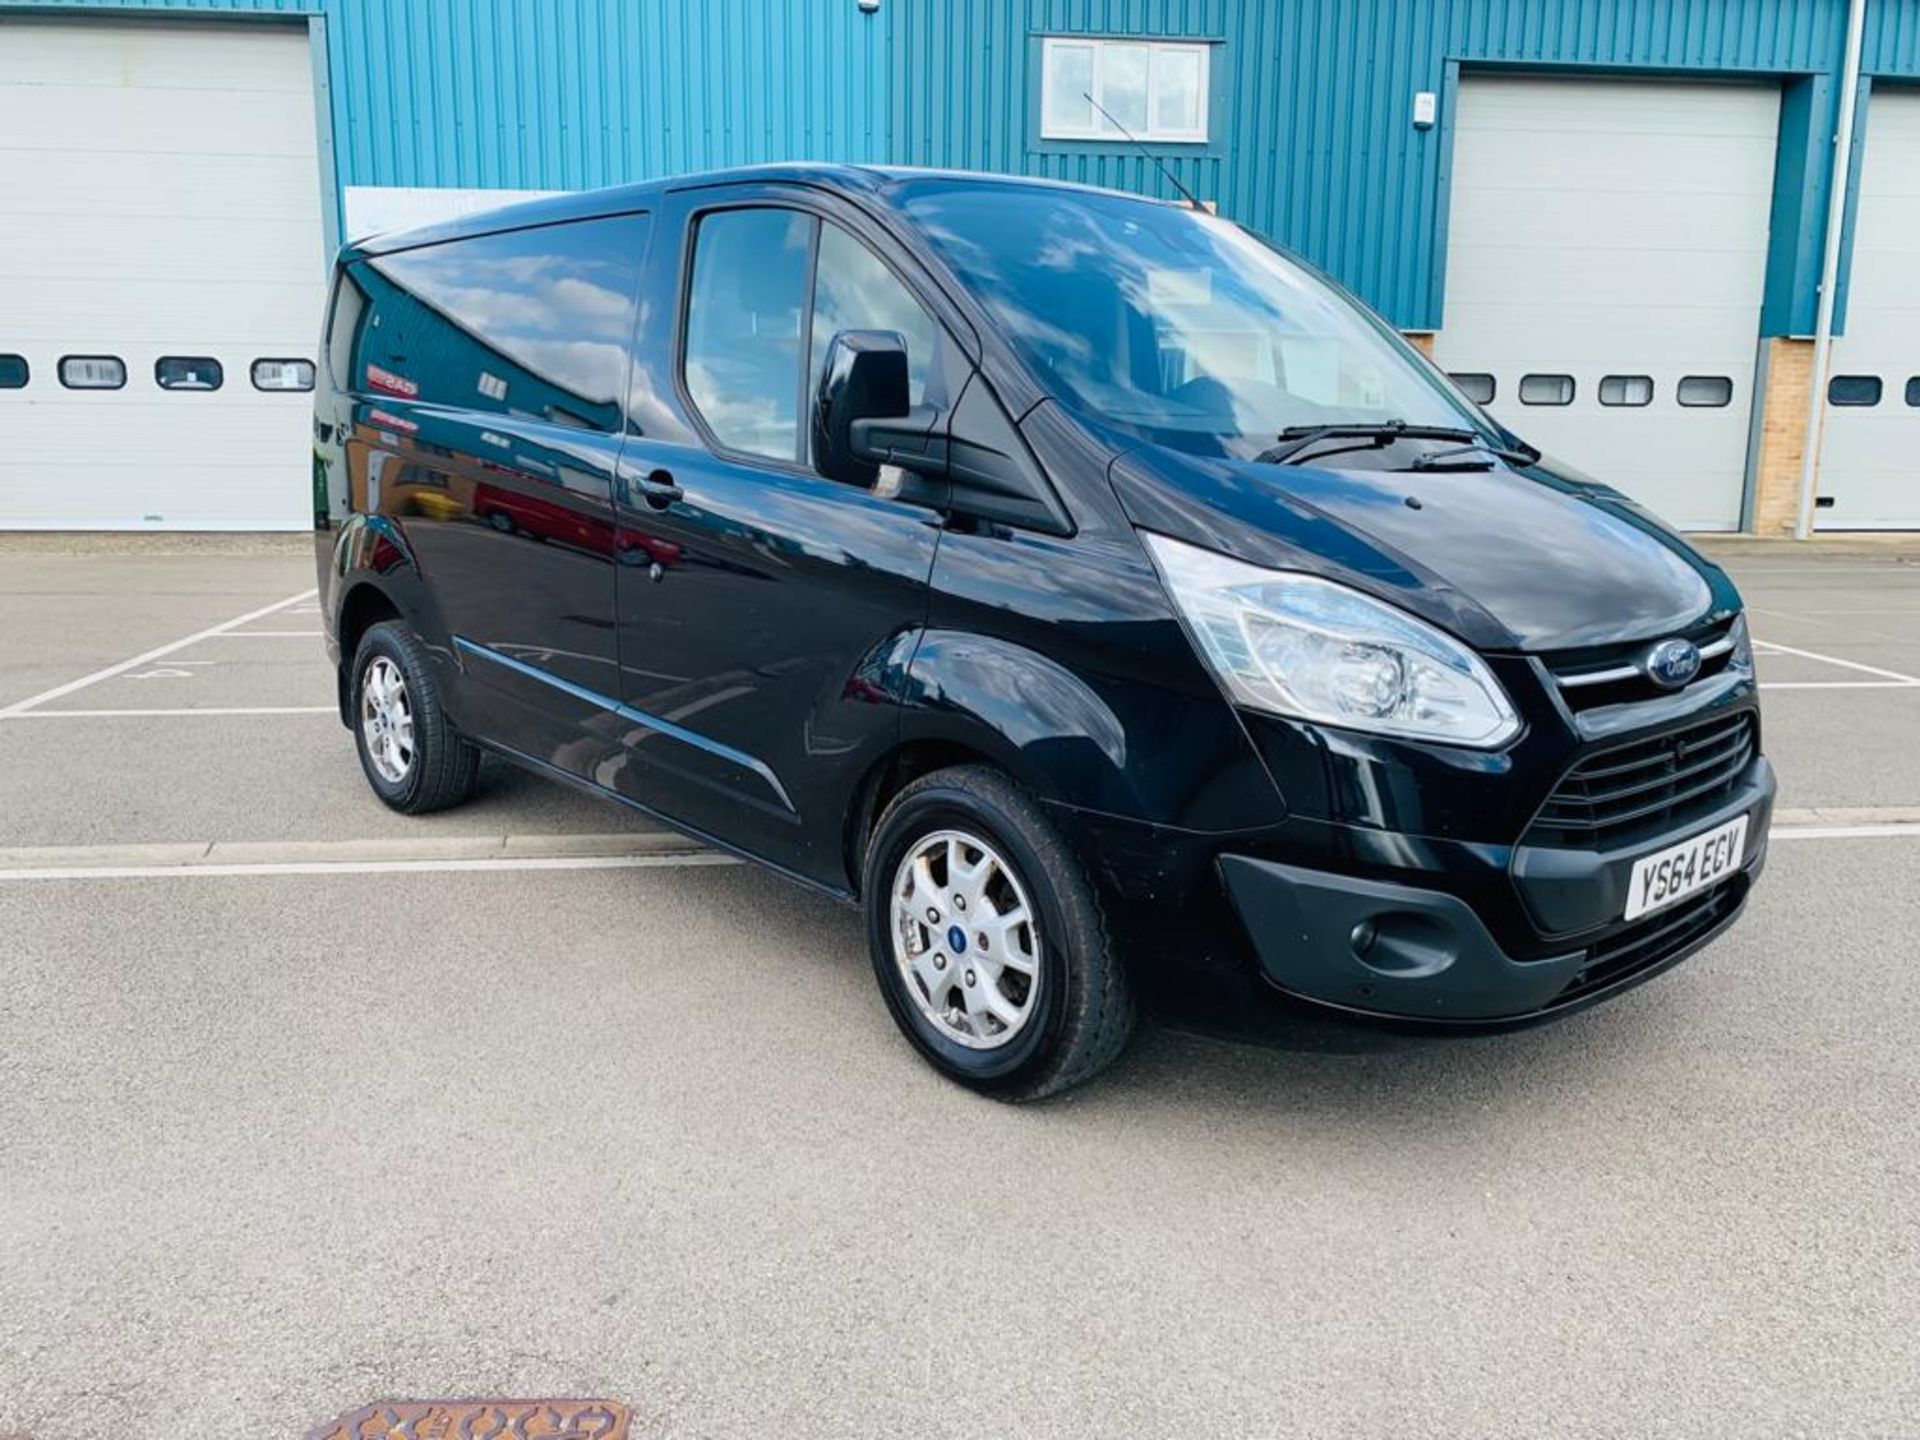 Ford Transit 2.2 TDCI Custom 270 Limited 2015 Model 6 Speed - Air Con - Park Assist